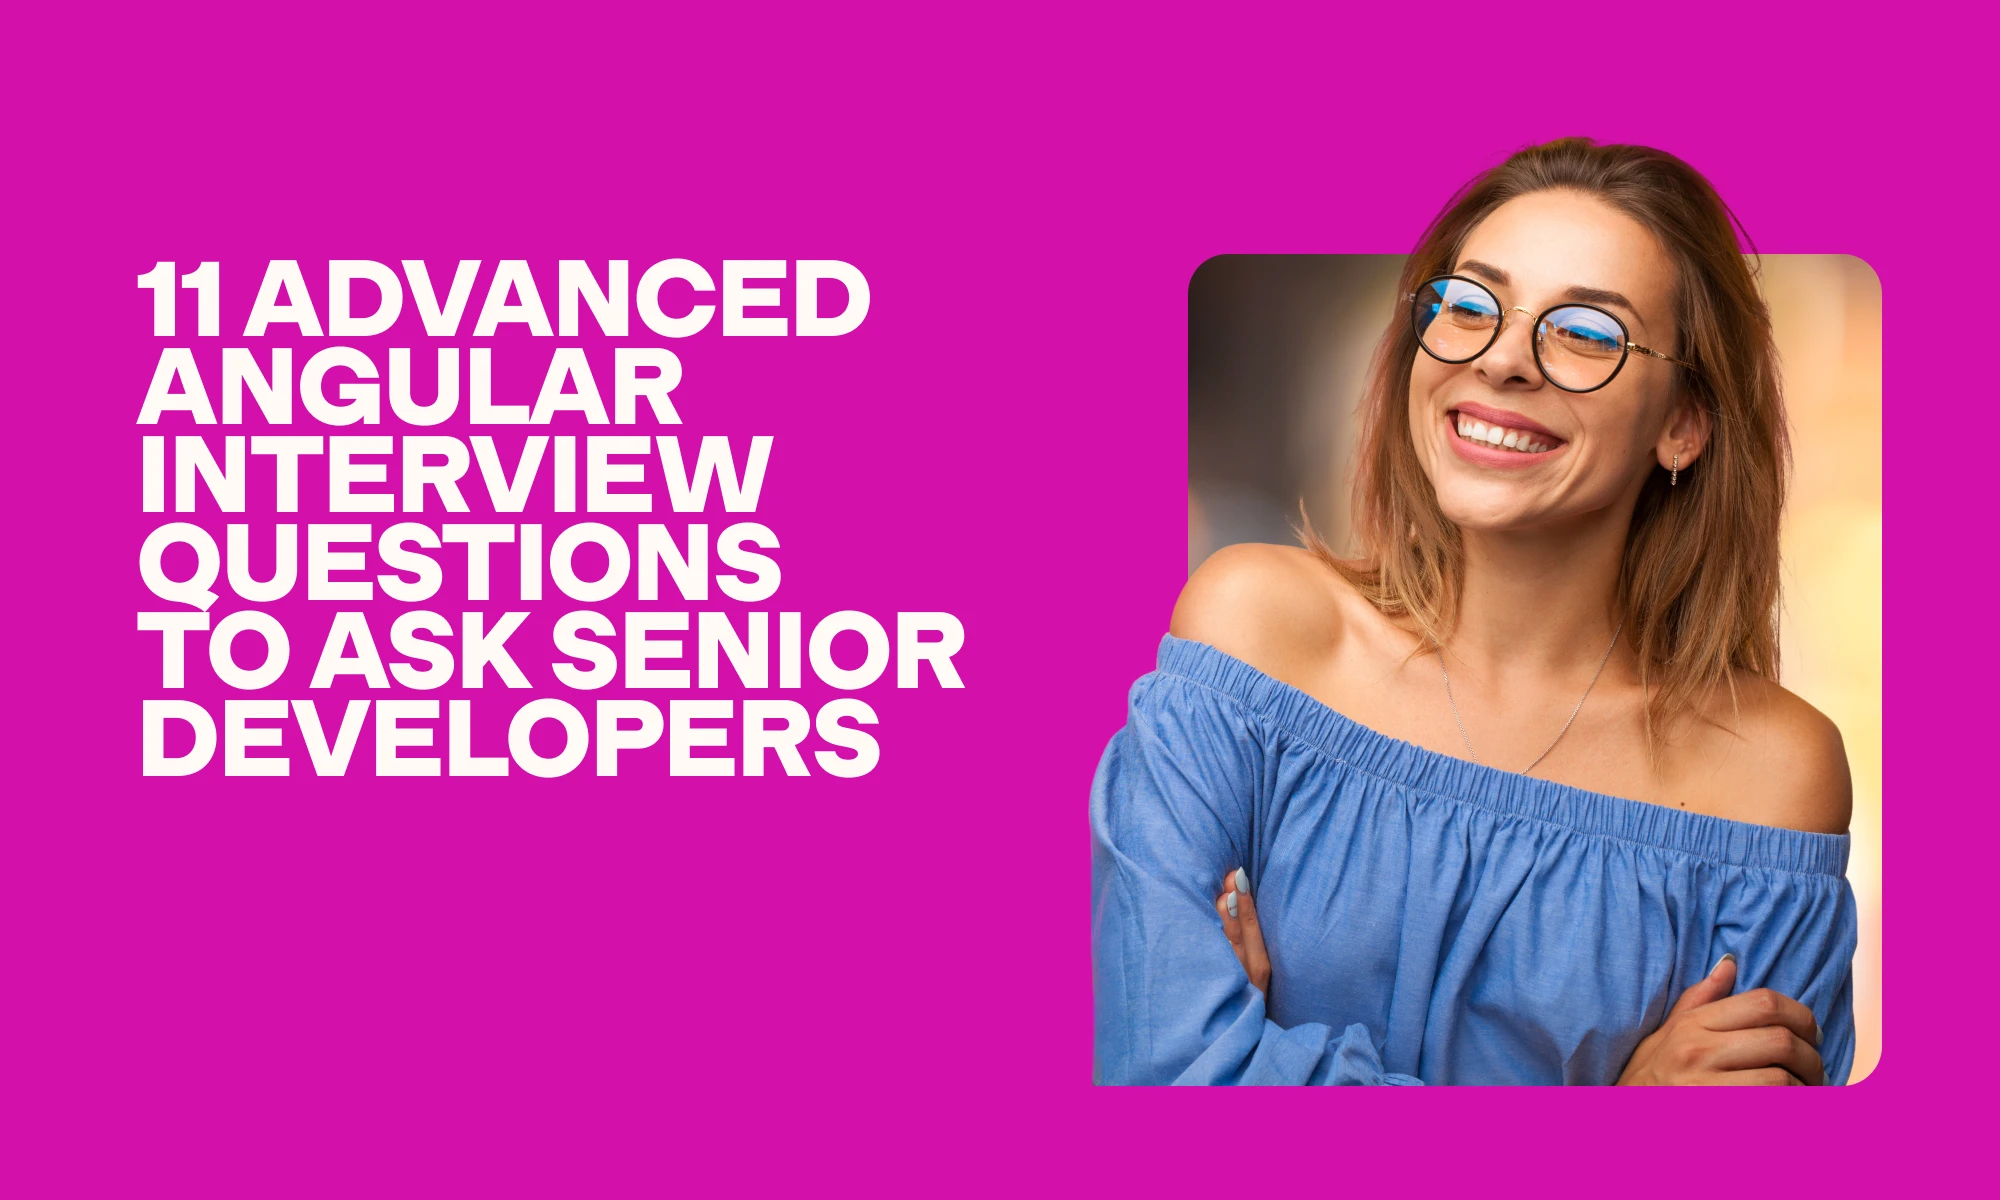 11 advanced Angular interview questions to ask senior developers